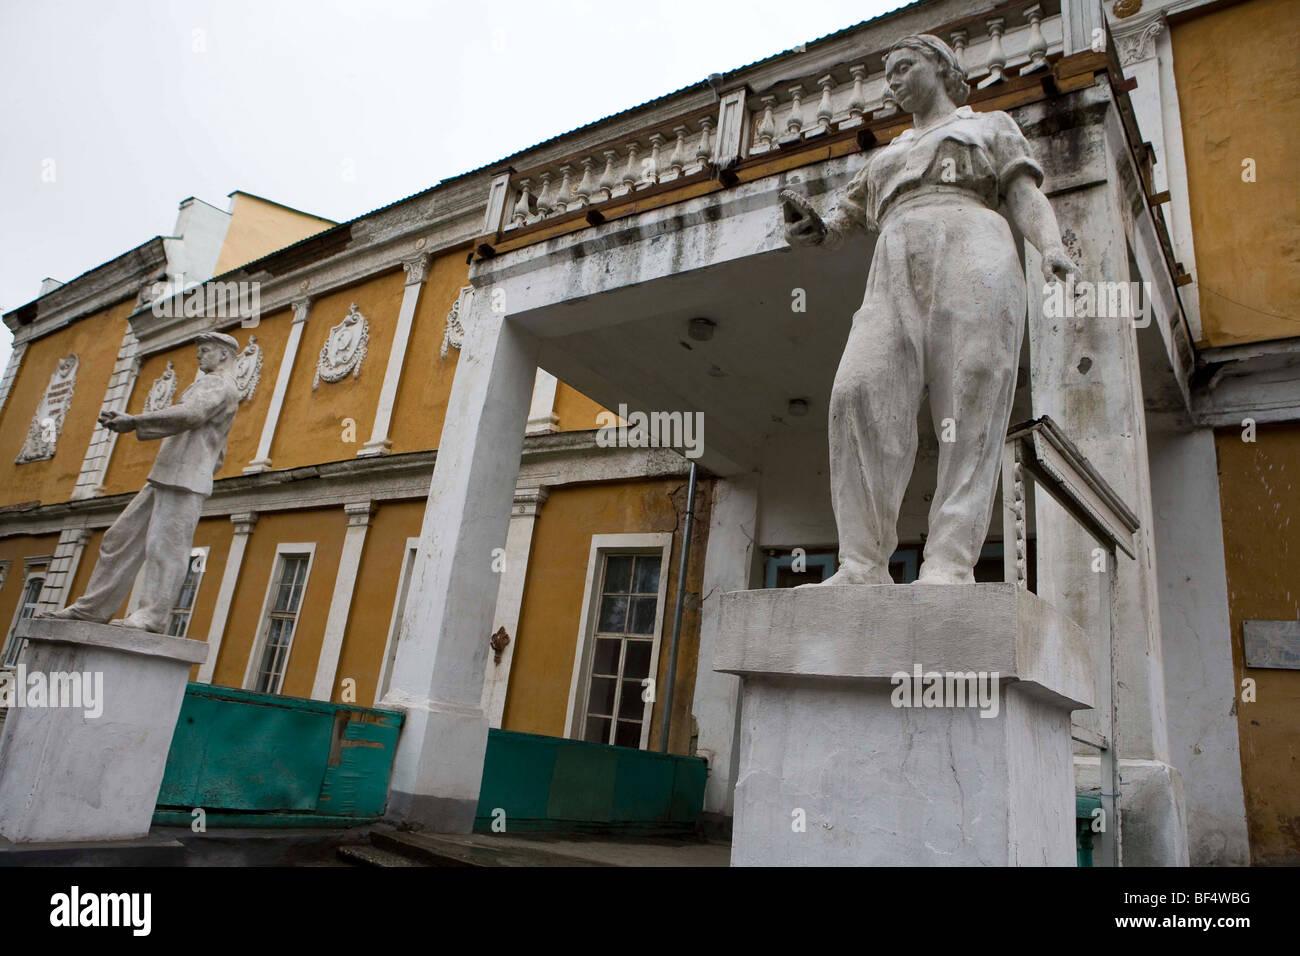 Worker statues at entrance of old soviet civic building in rural Russia Stock Photo